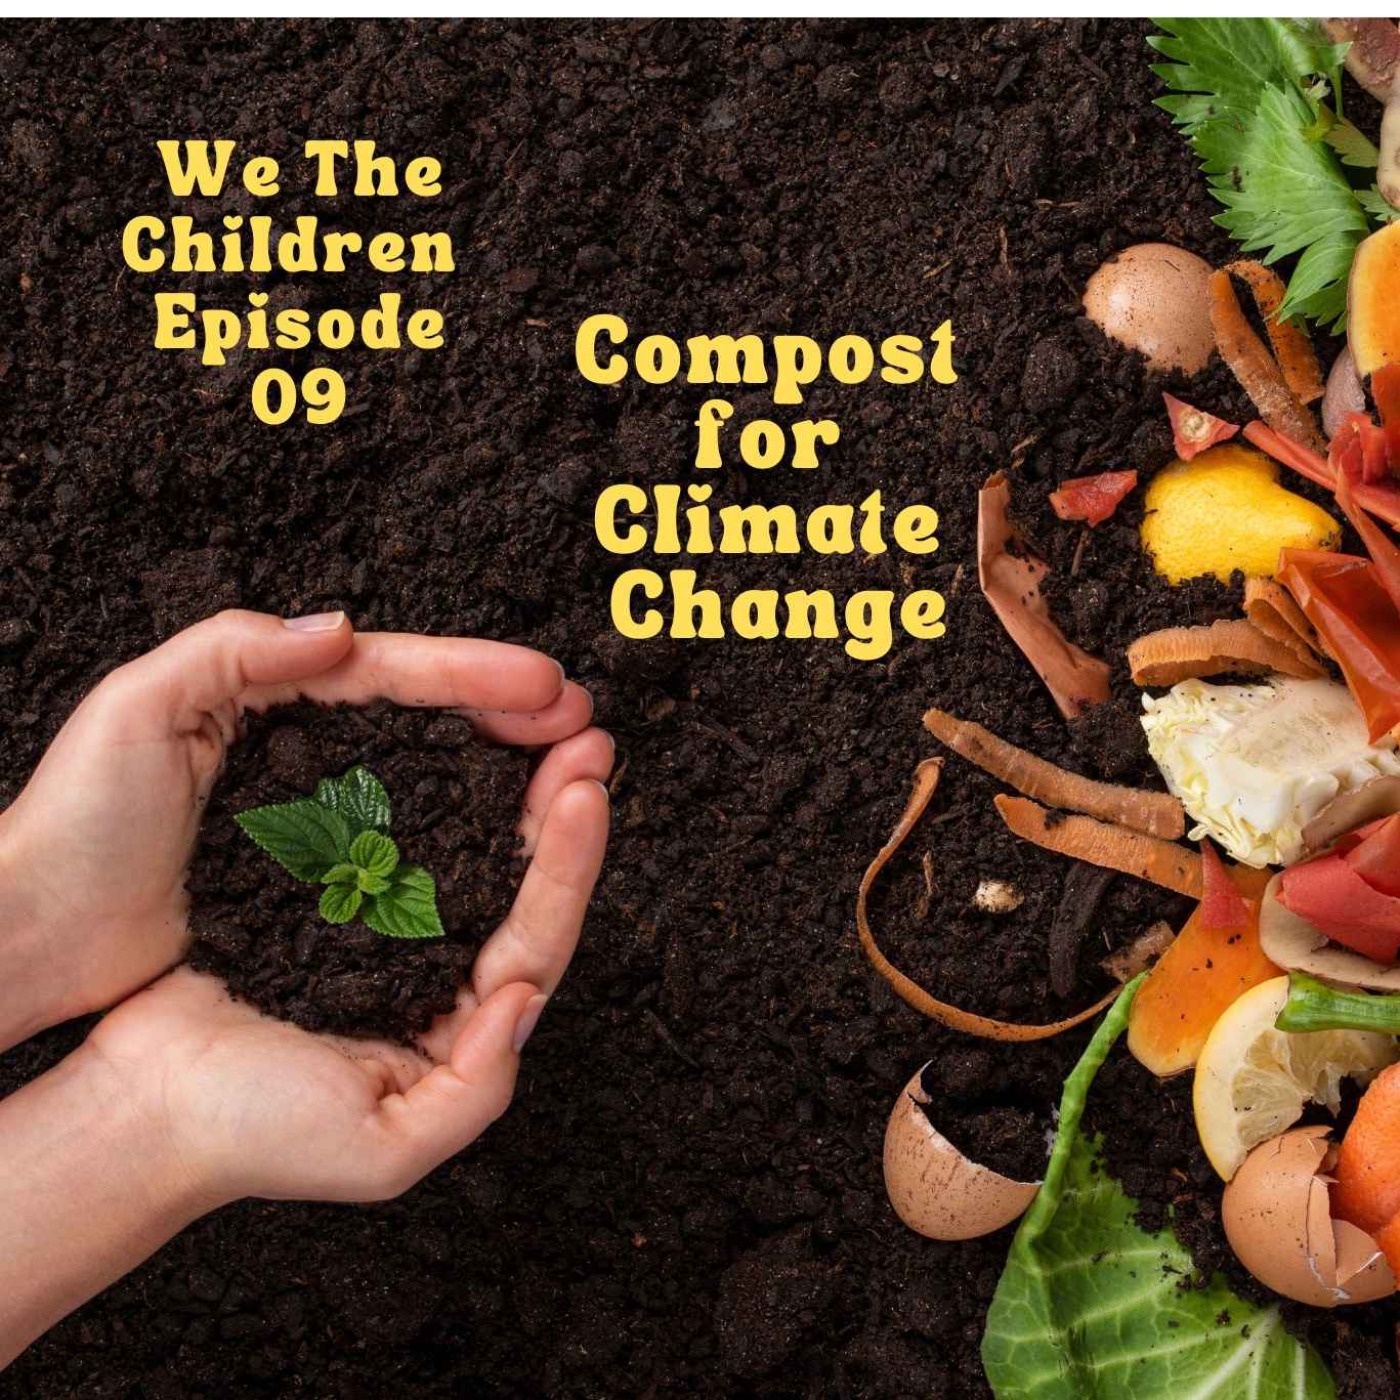 We The Children - Compost for Climate Change